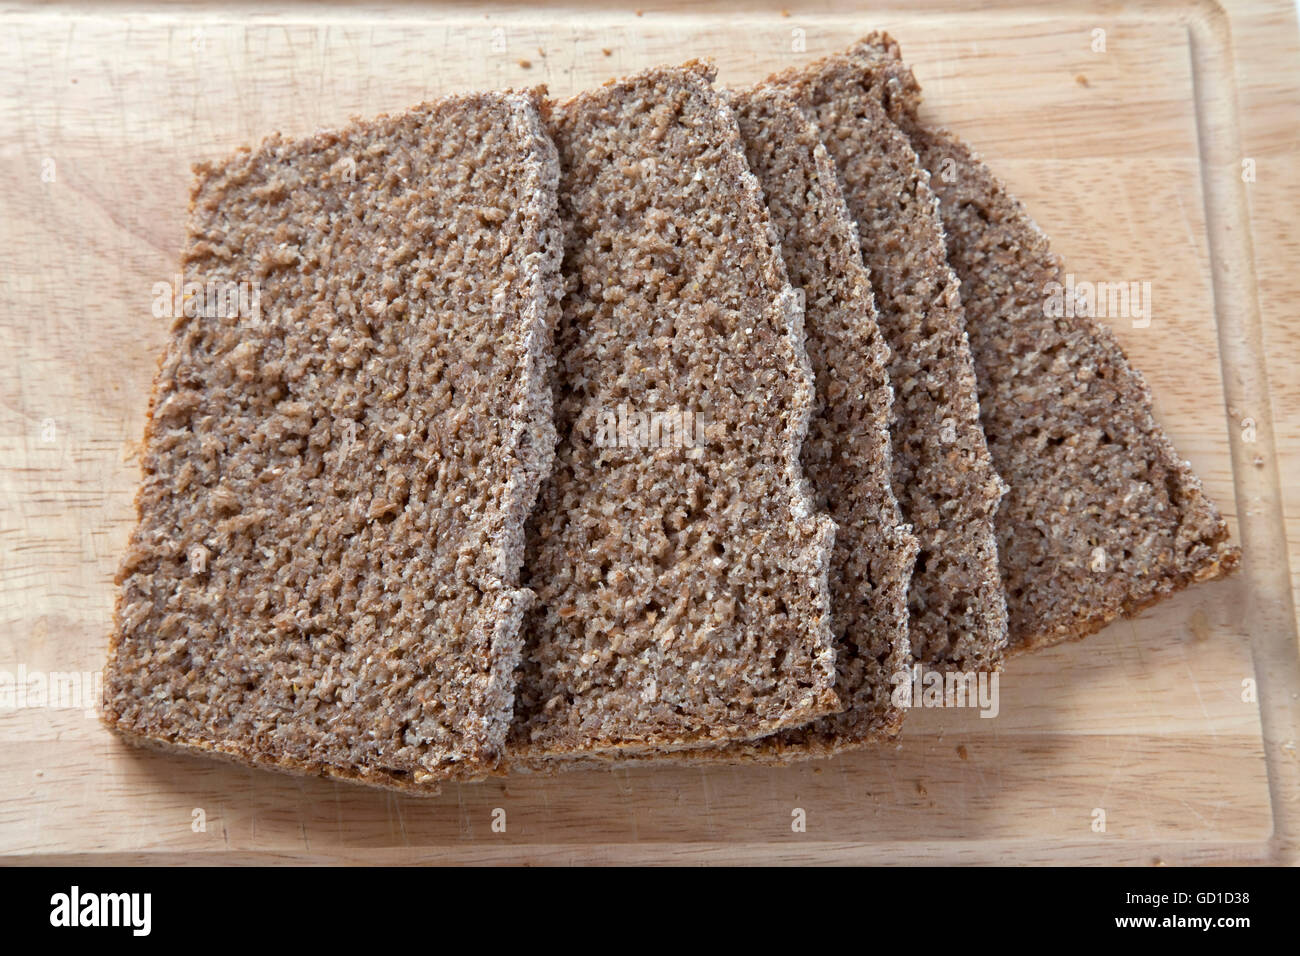 Slices of whole grain bread on a wooden board Stock Photo